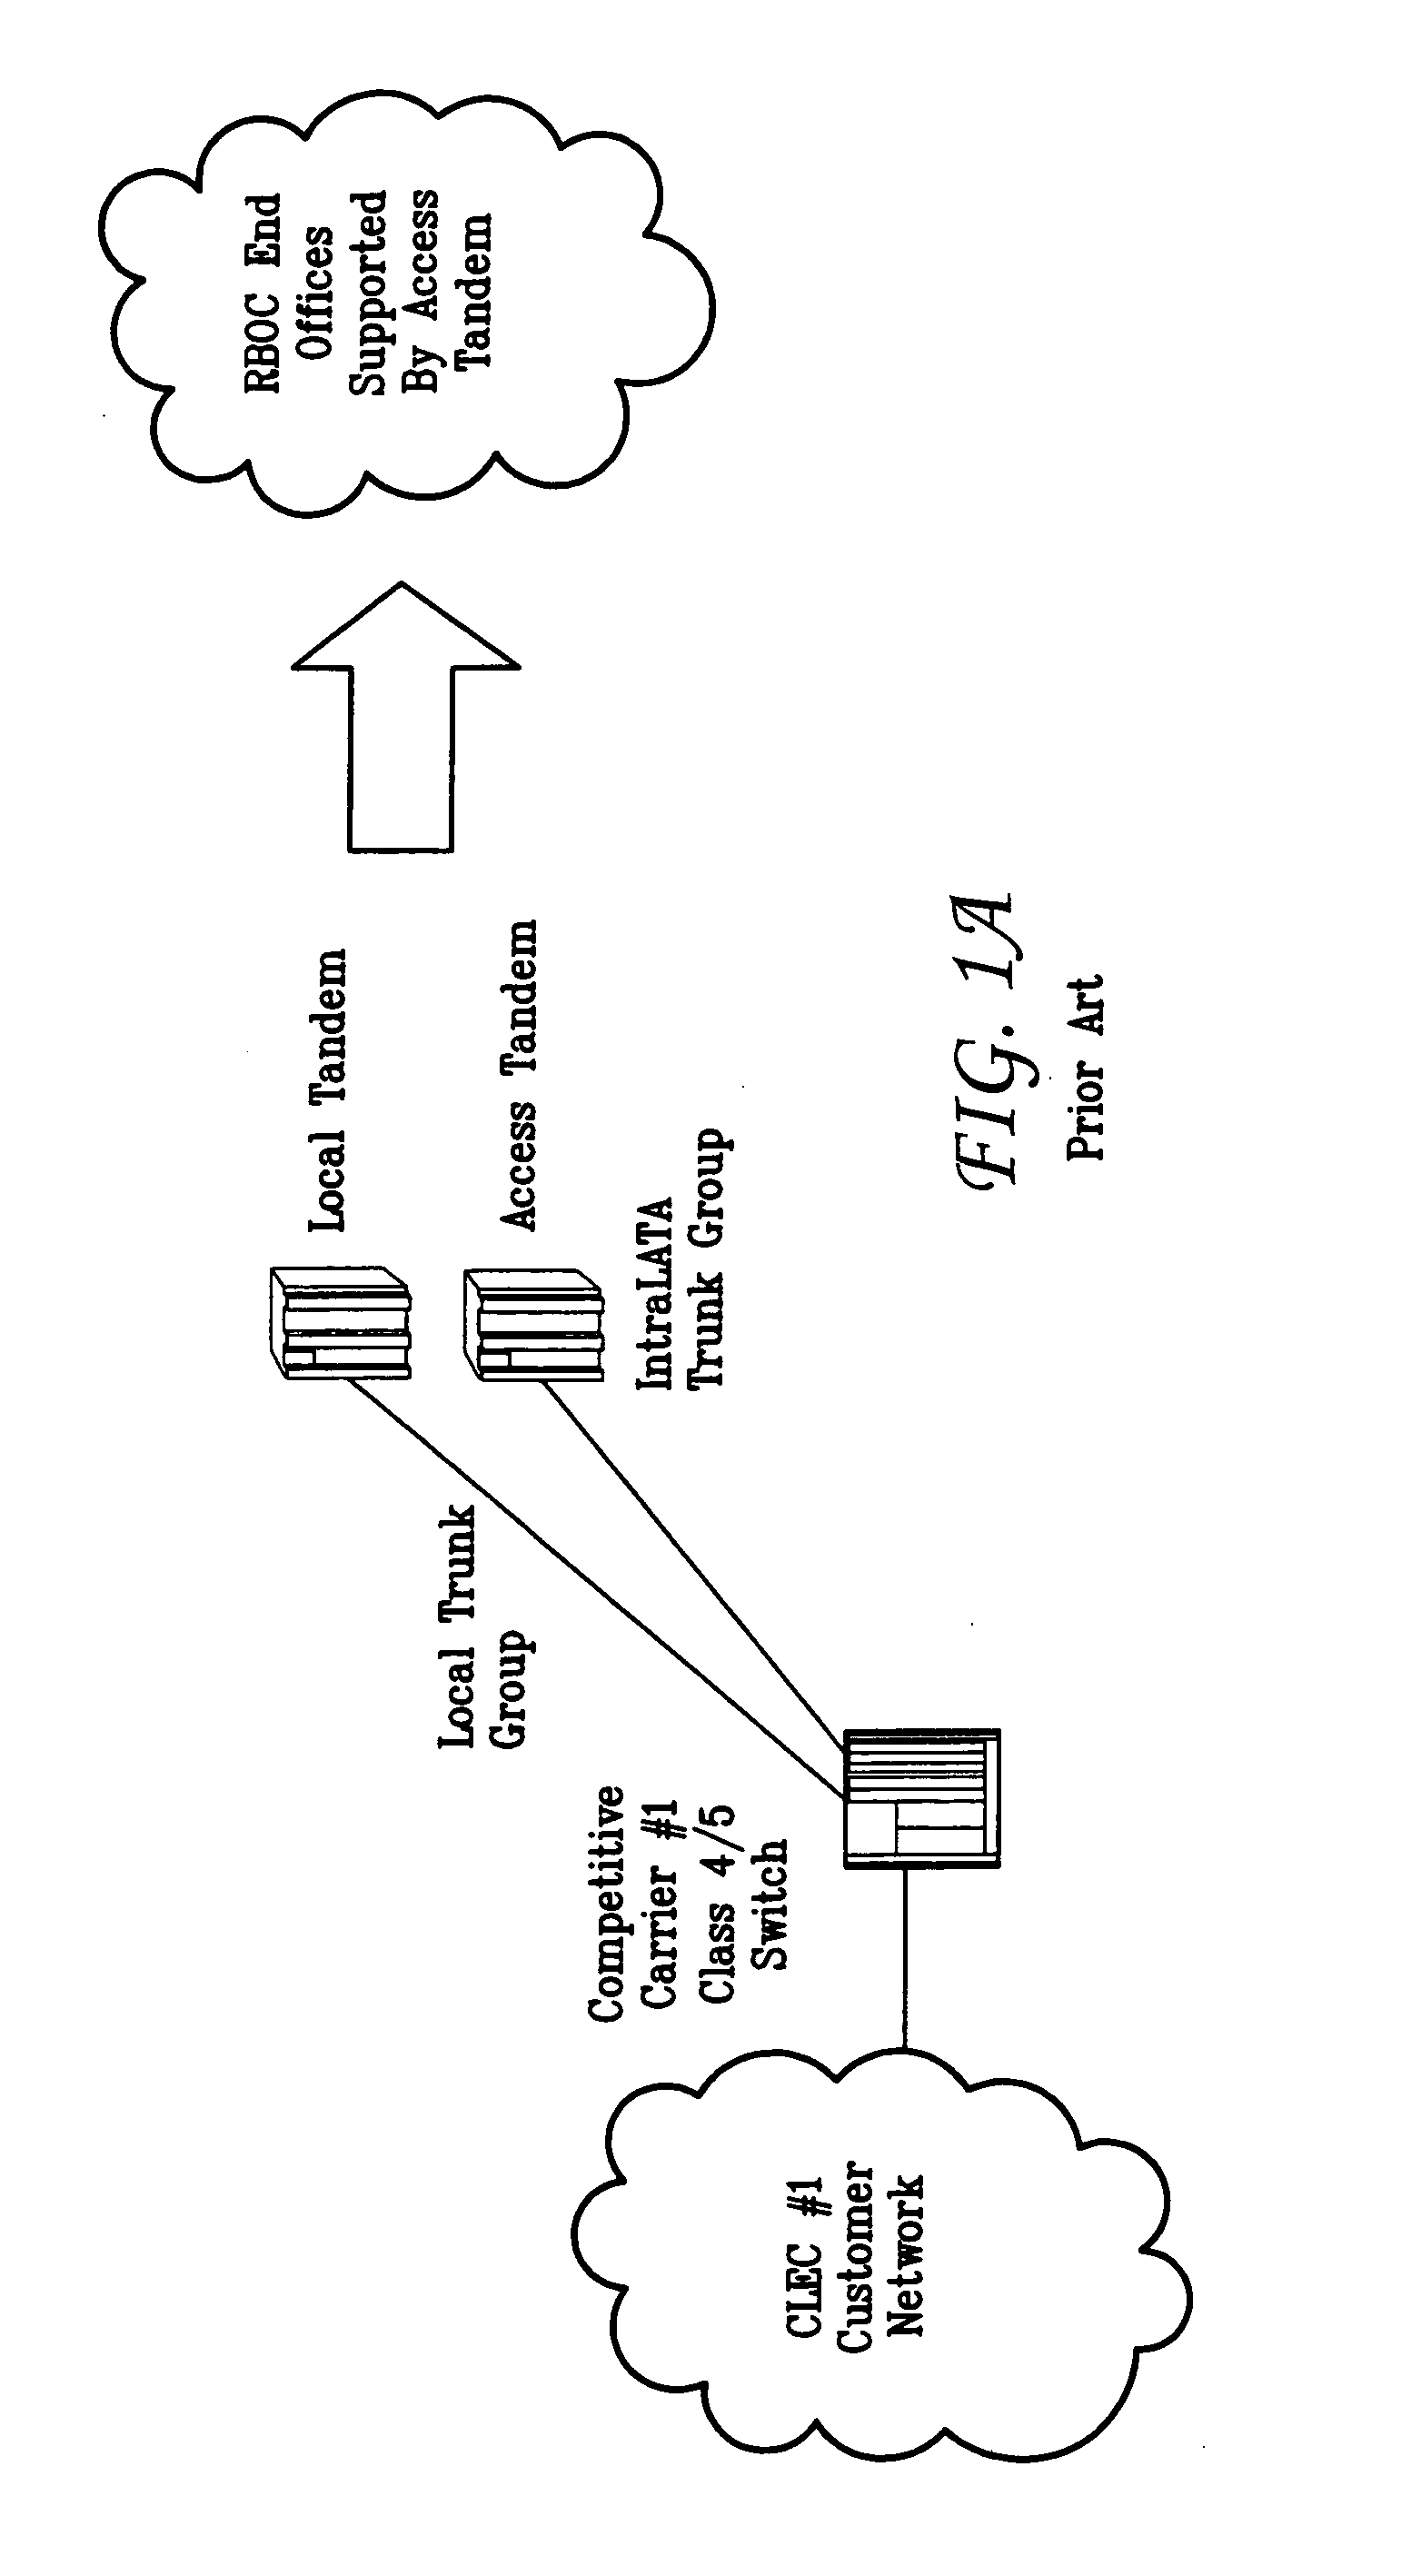 Neutral tandem telecommunications network providing transiting, terminating, and advanced traffic routing services to public and private carrier networks